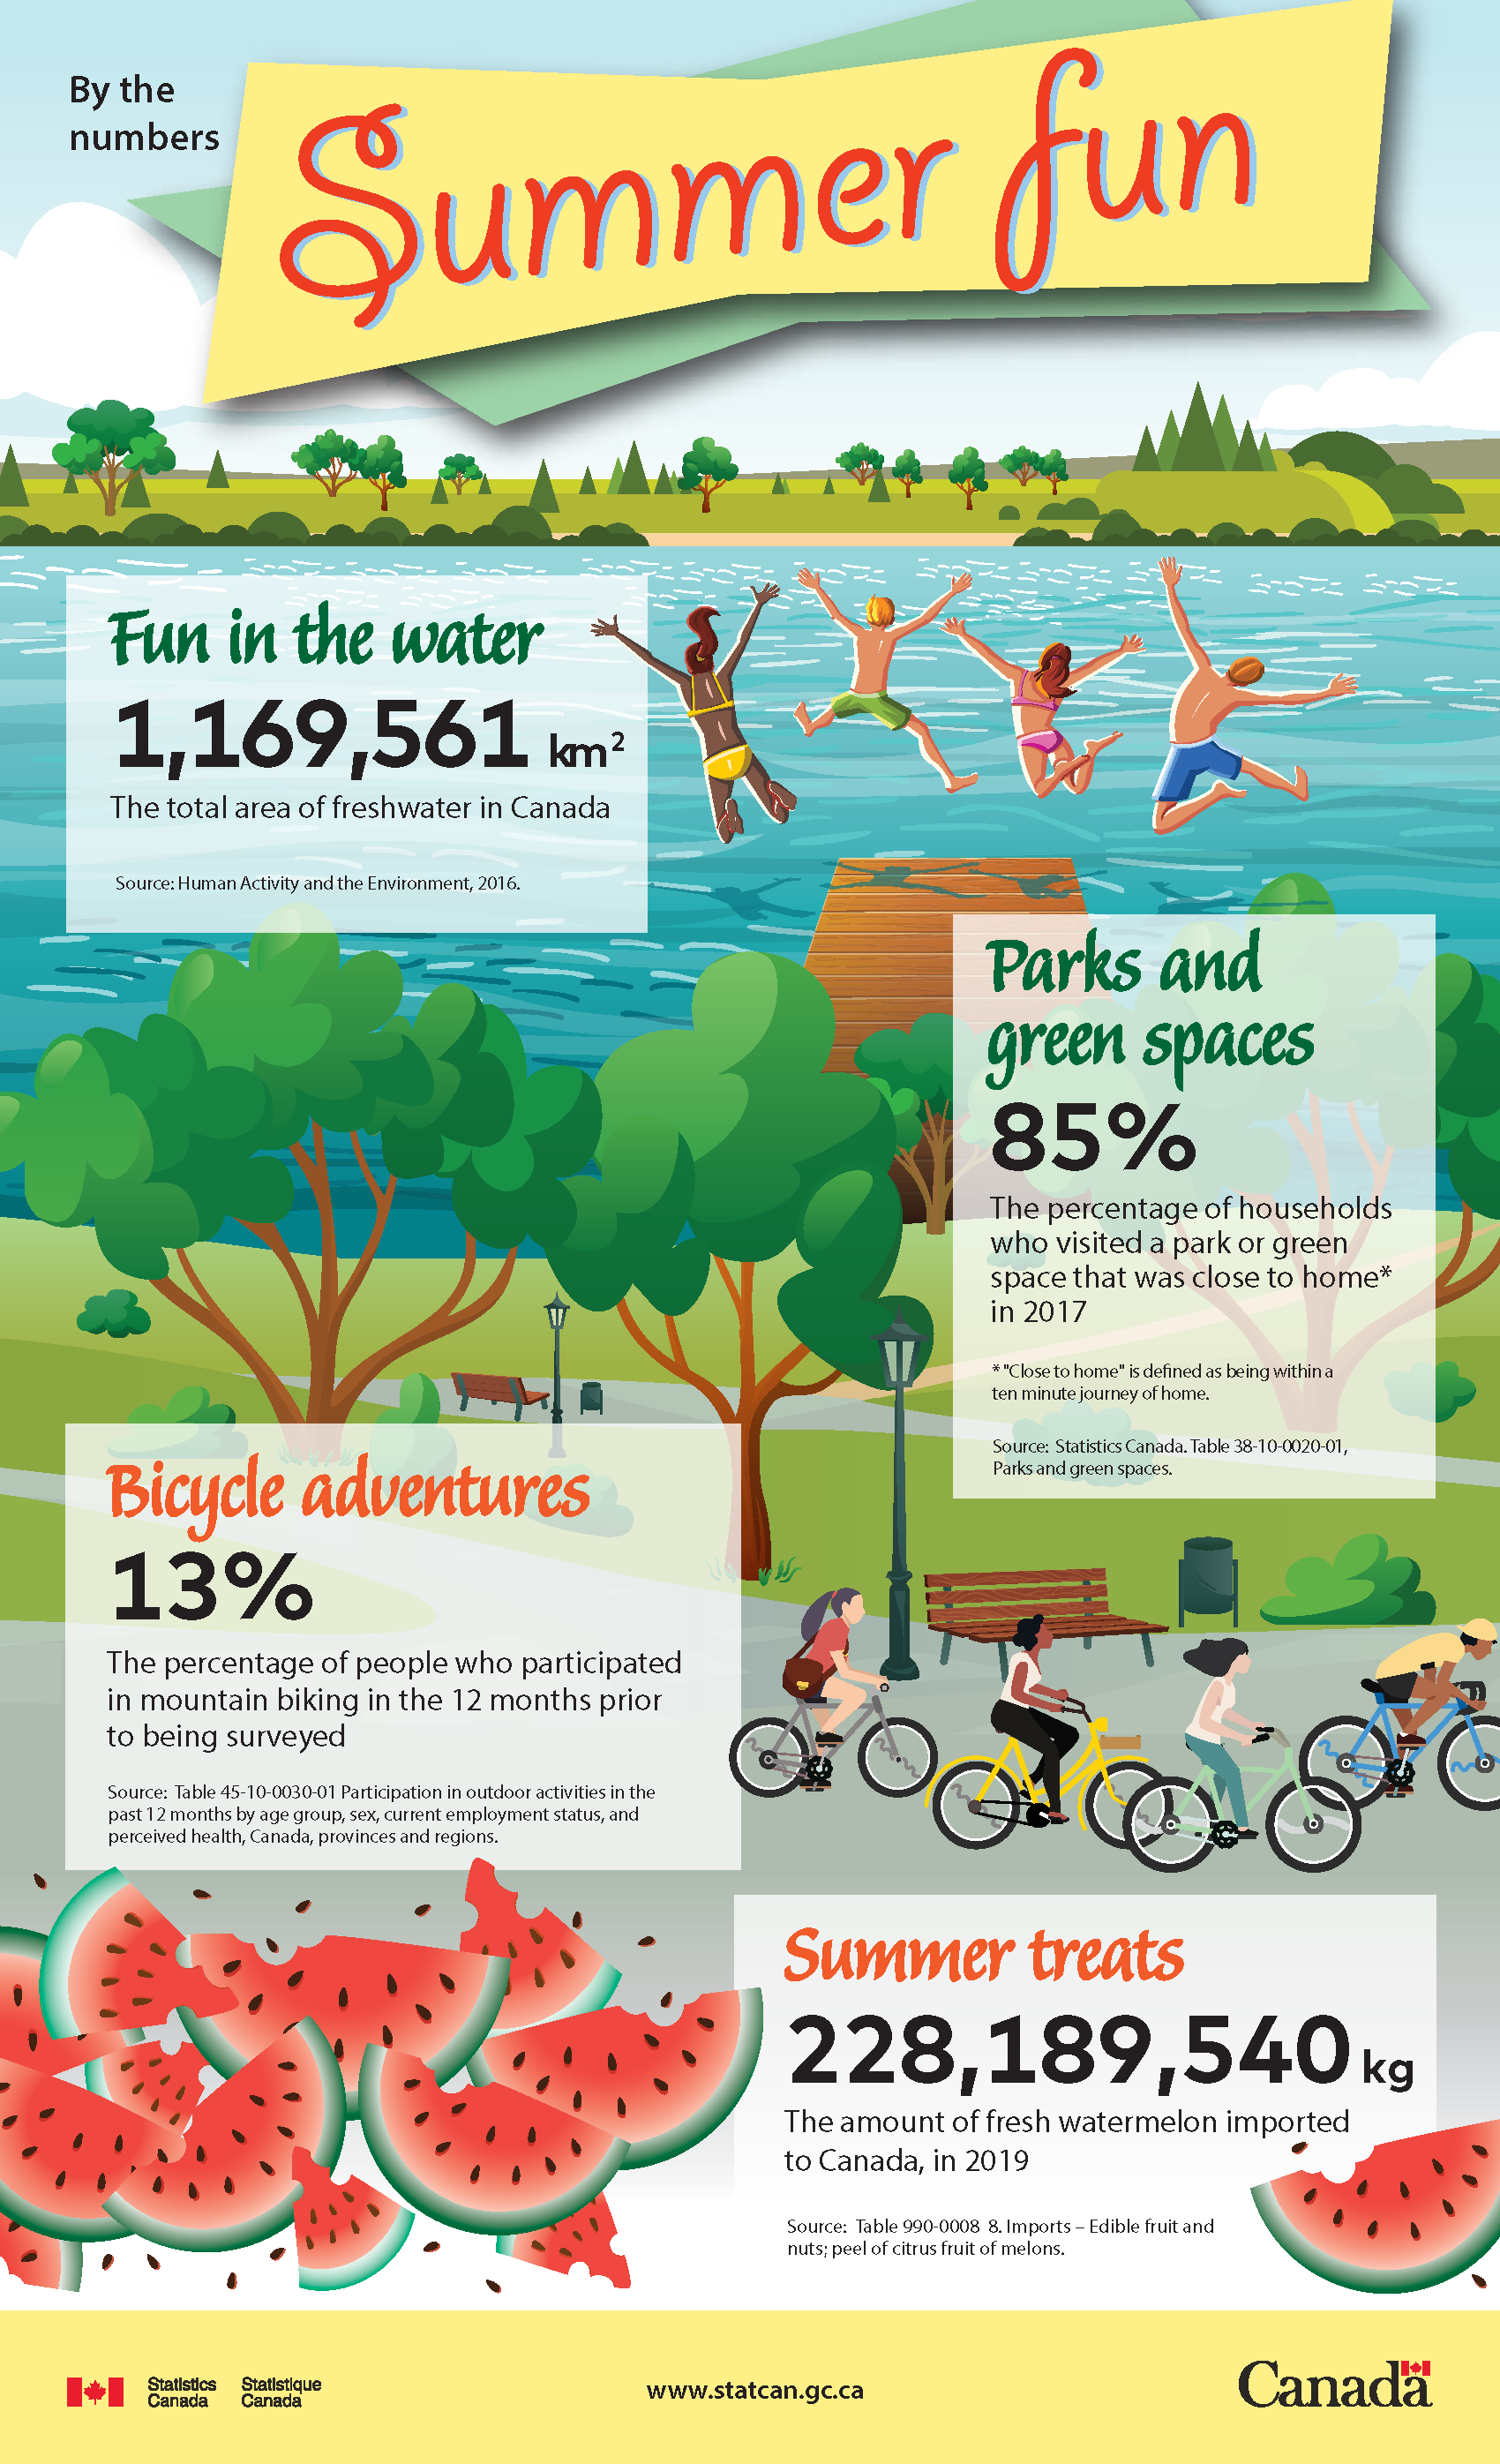 By the numbers: Summer fun